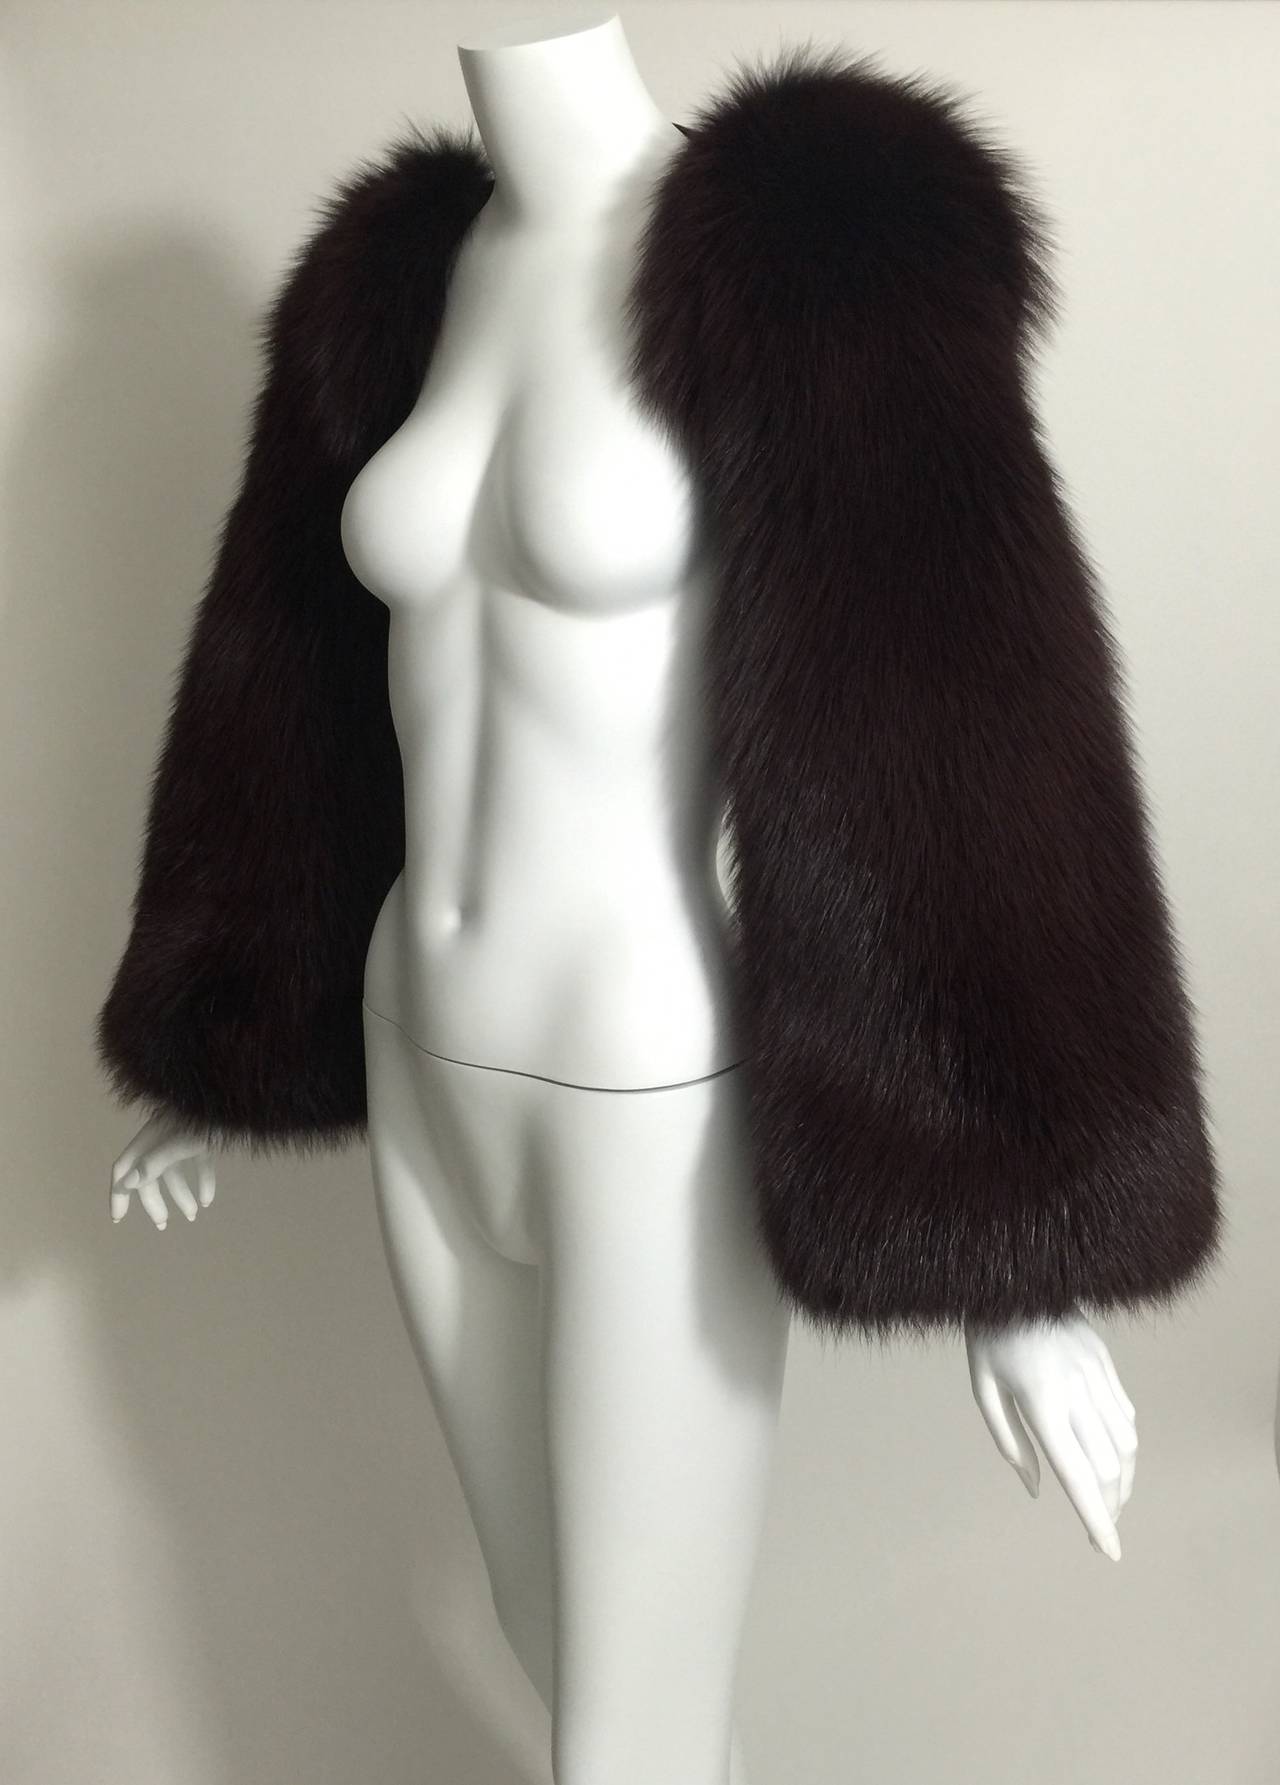 Maroon Fox fur sleeves from Ferragamo runway  Fall  2009. Sleeves are connected   with a leather strap and three different button adjustments on either side. Sleeves are lined.

Measurements:
Length: 25.5 